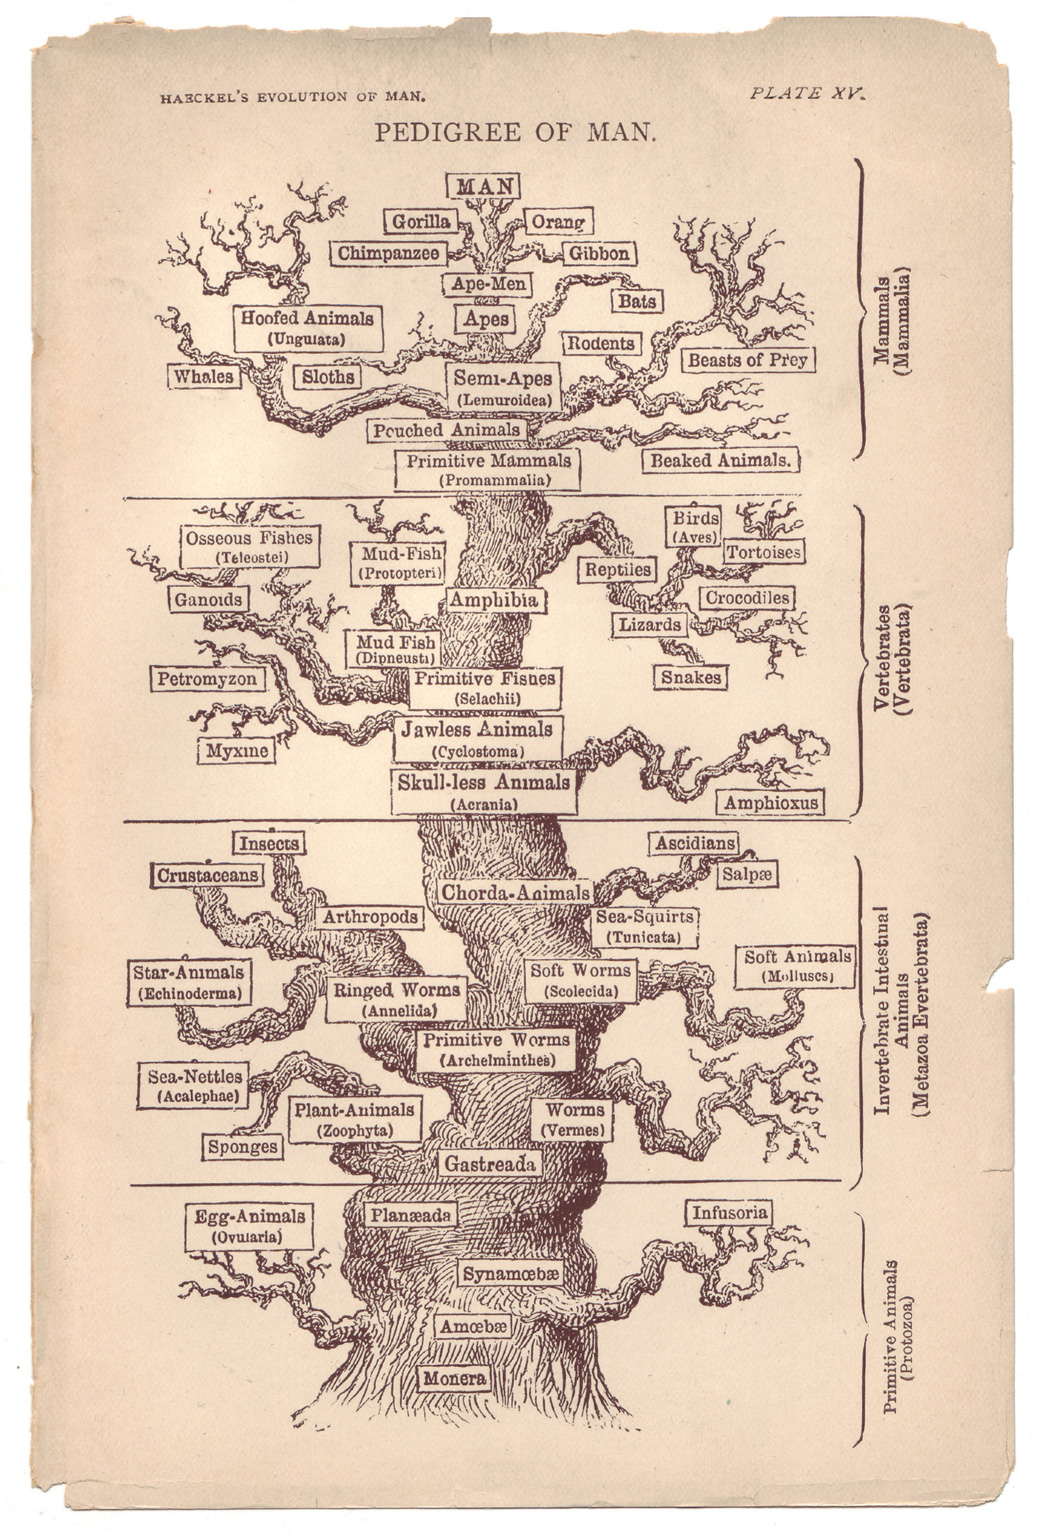 Ernst Haeckel’s first diagram of the Tree of Life appeared in eighteen sixty six in “General Morphology.” The tree had become an enormous oak by the time this drawing appeared in his eighteen seventy nine book, “The Evolution of Man.”